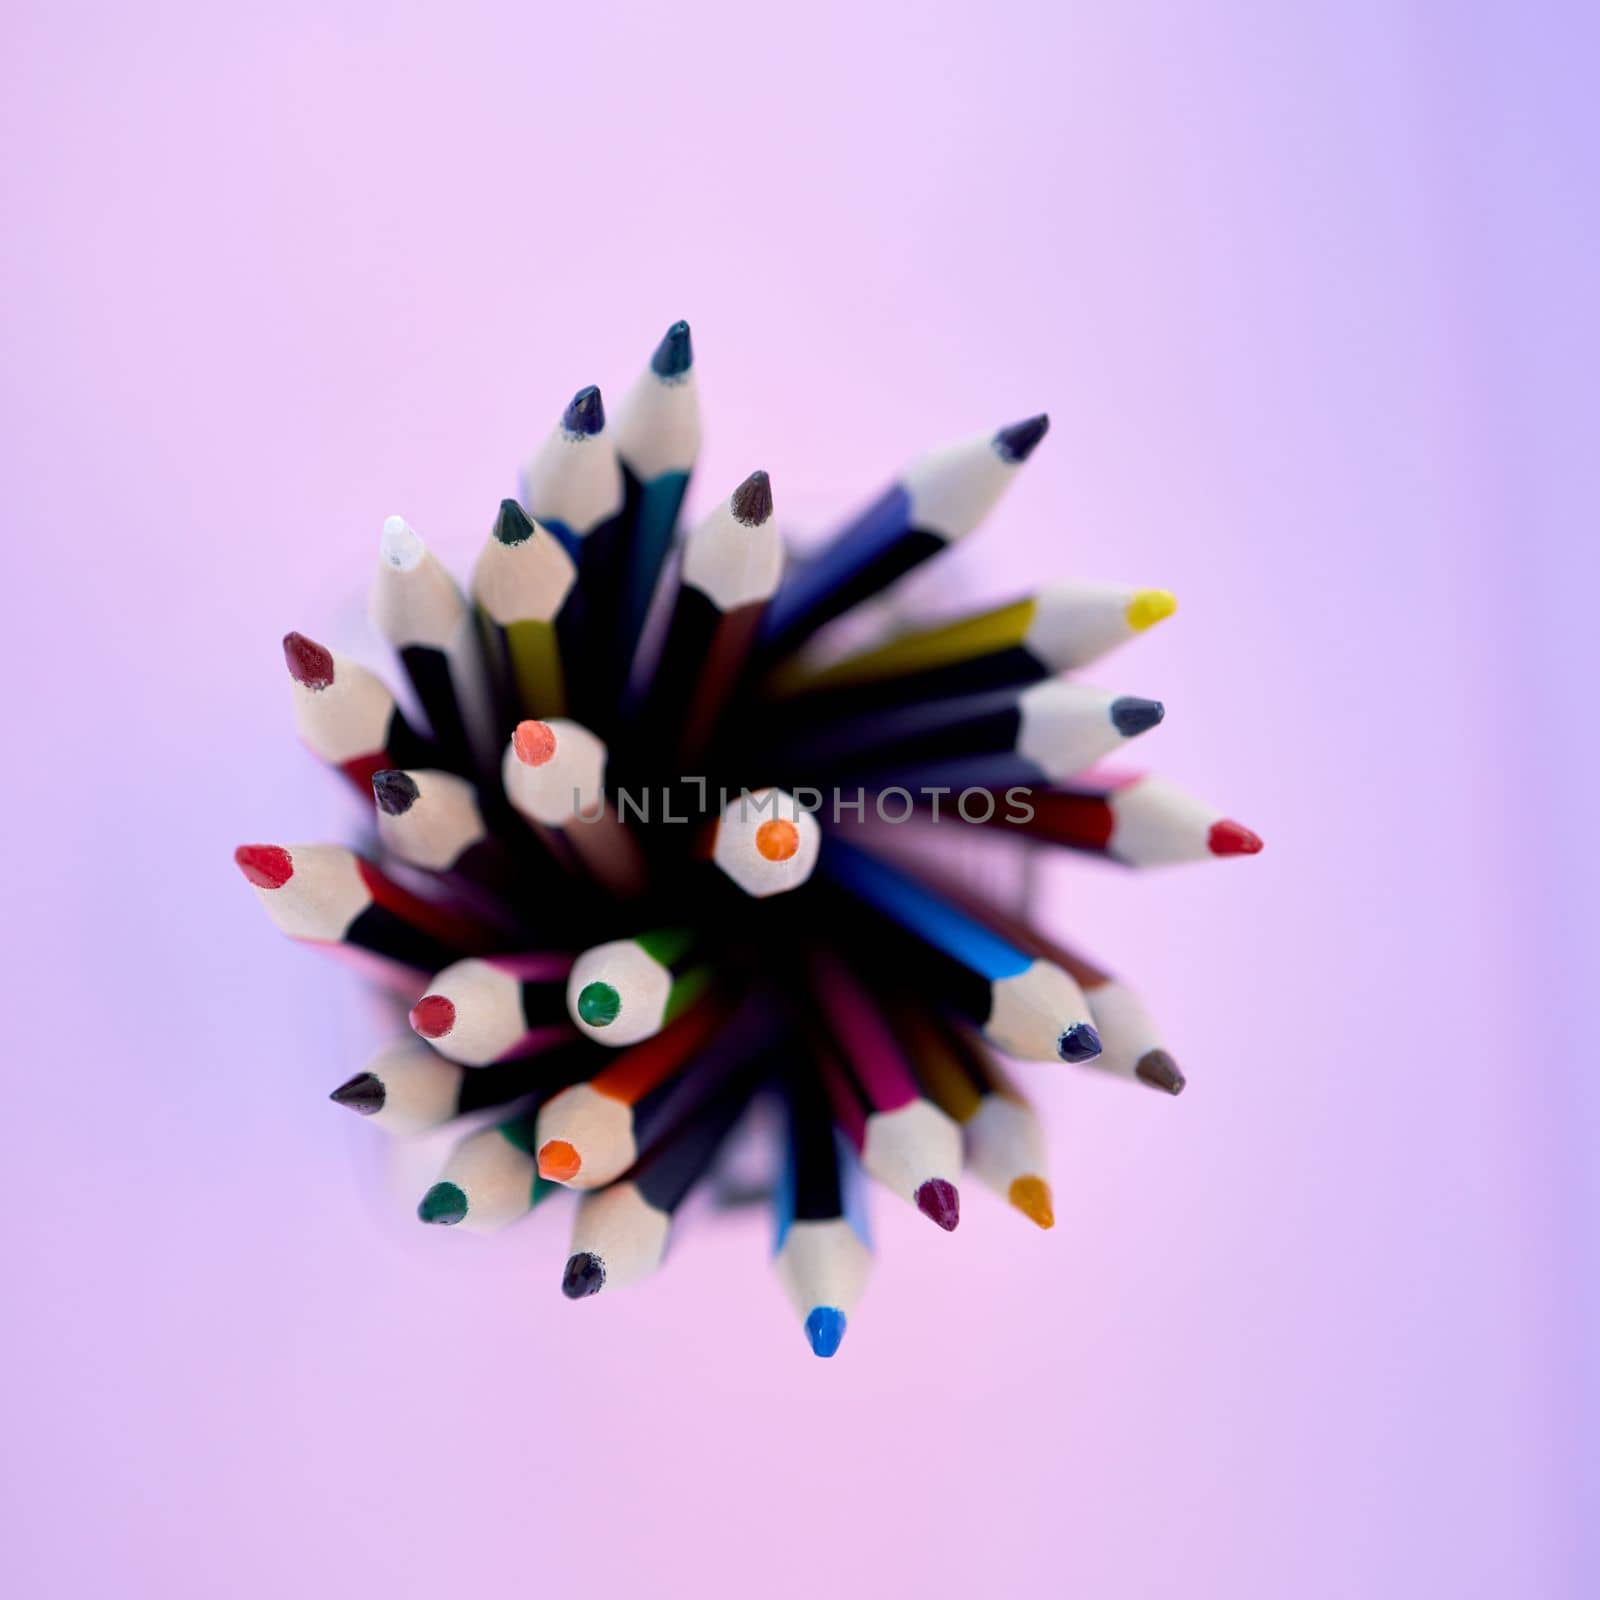 Pencil, color and stationery with top view, school or art supplies zoom for drawing with education and creative. Writing tools, creativity mockup and colorful close up against studio background.